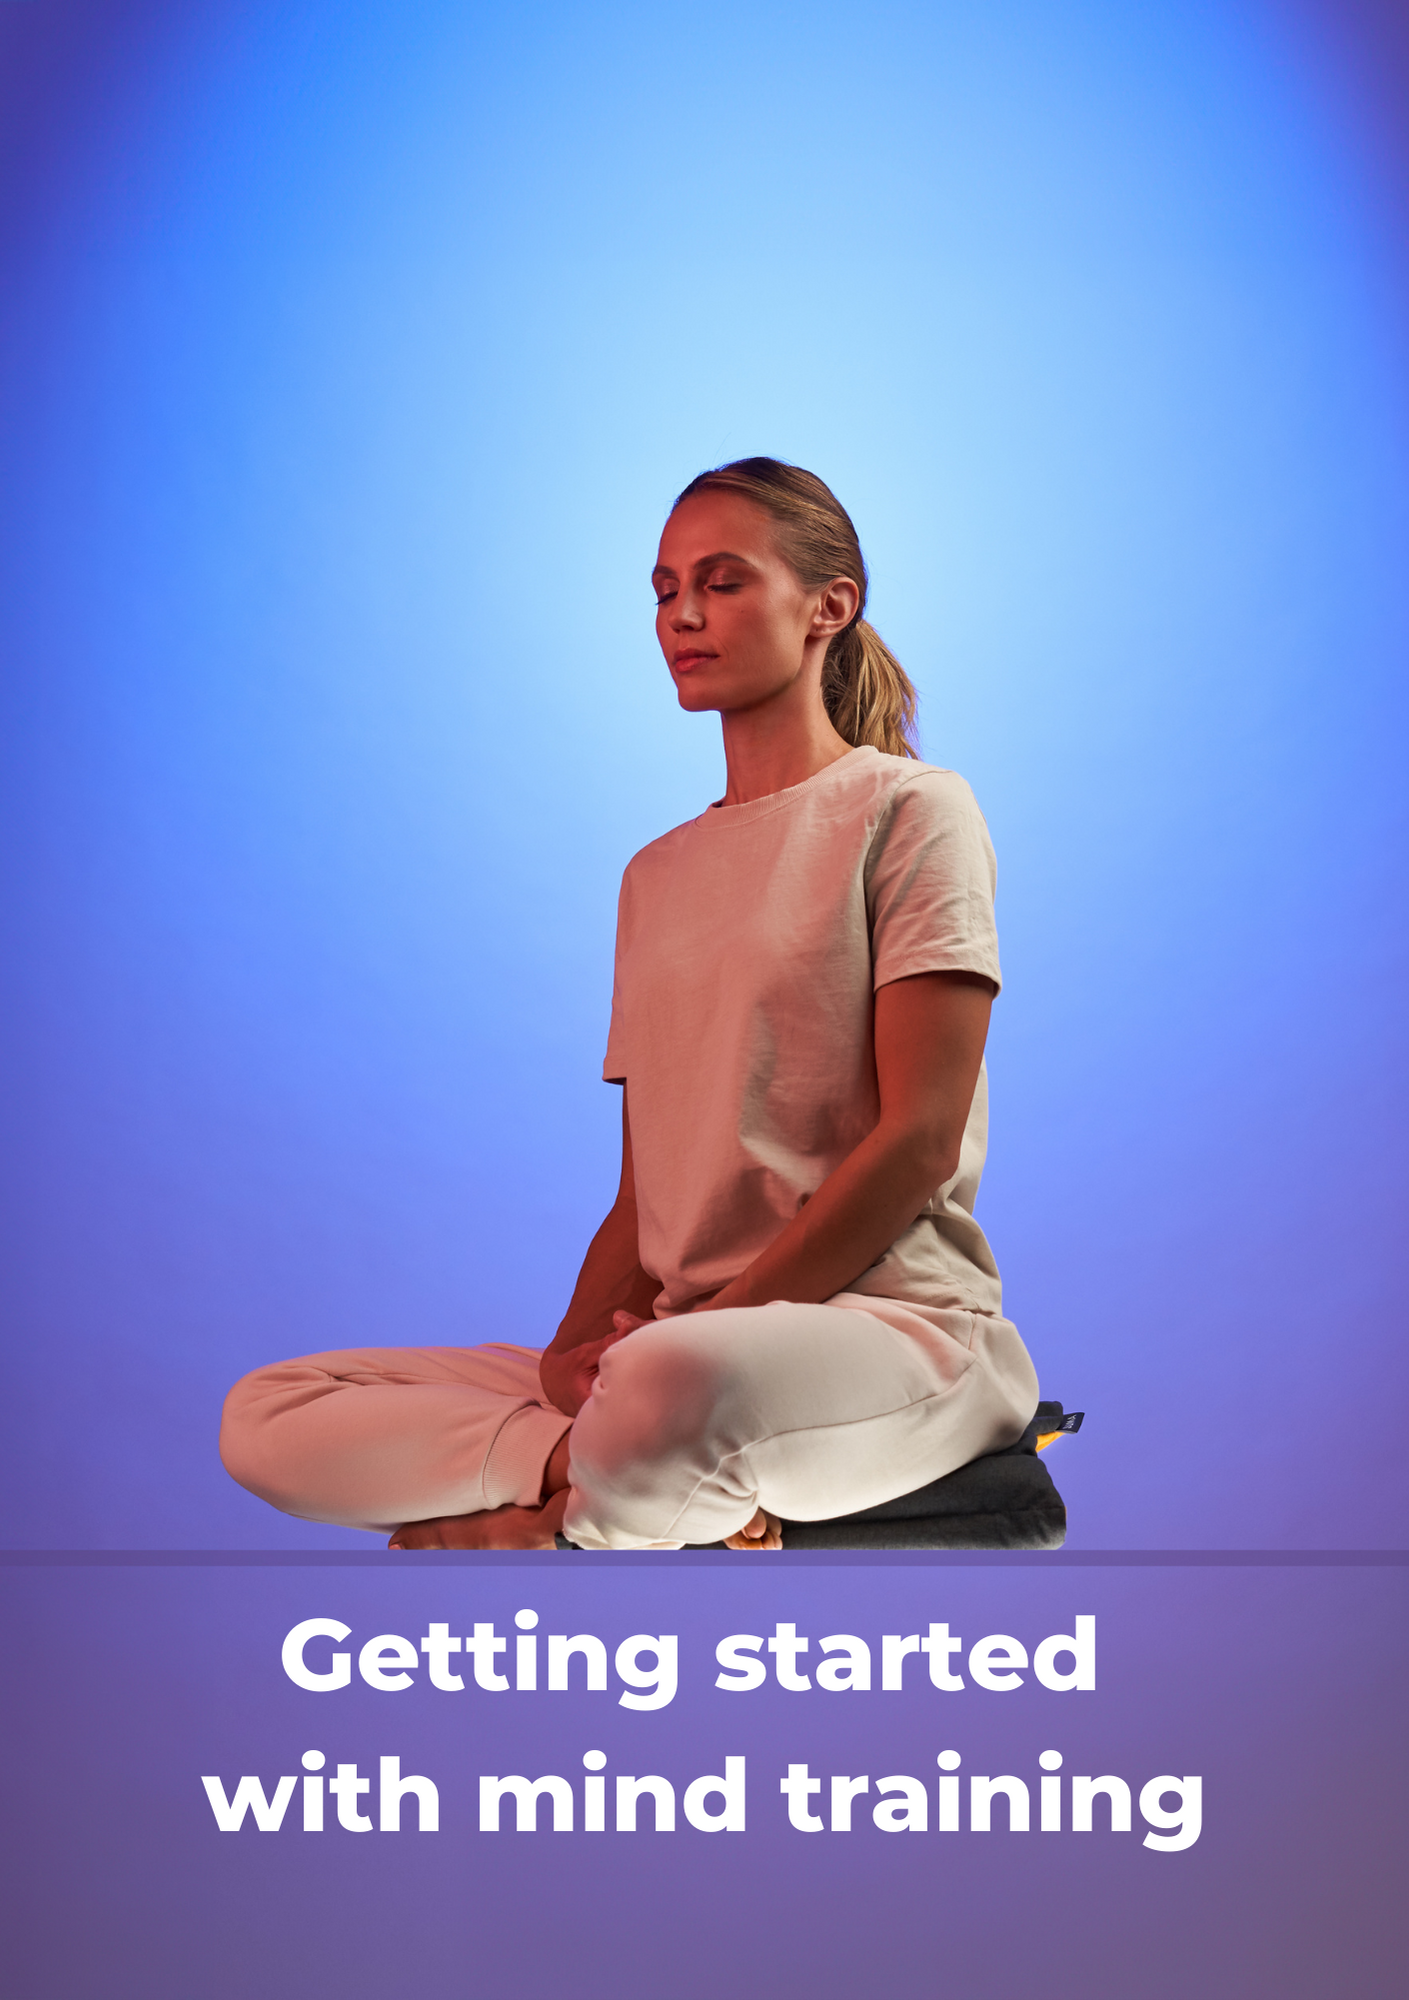 How to meditate? The simplest way to get started with mind training.